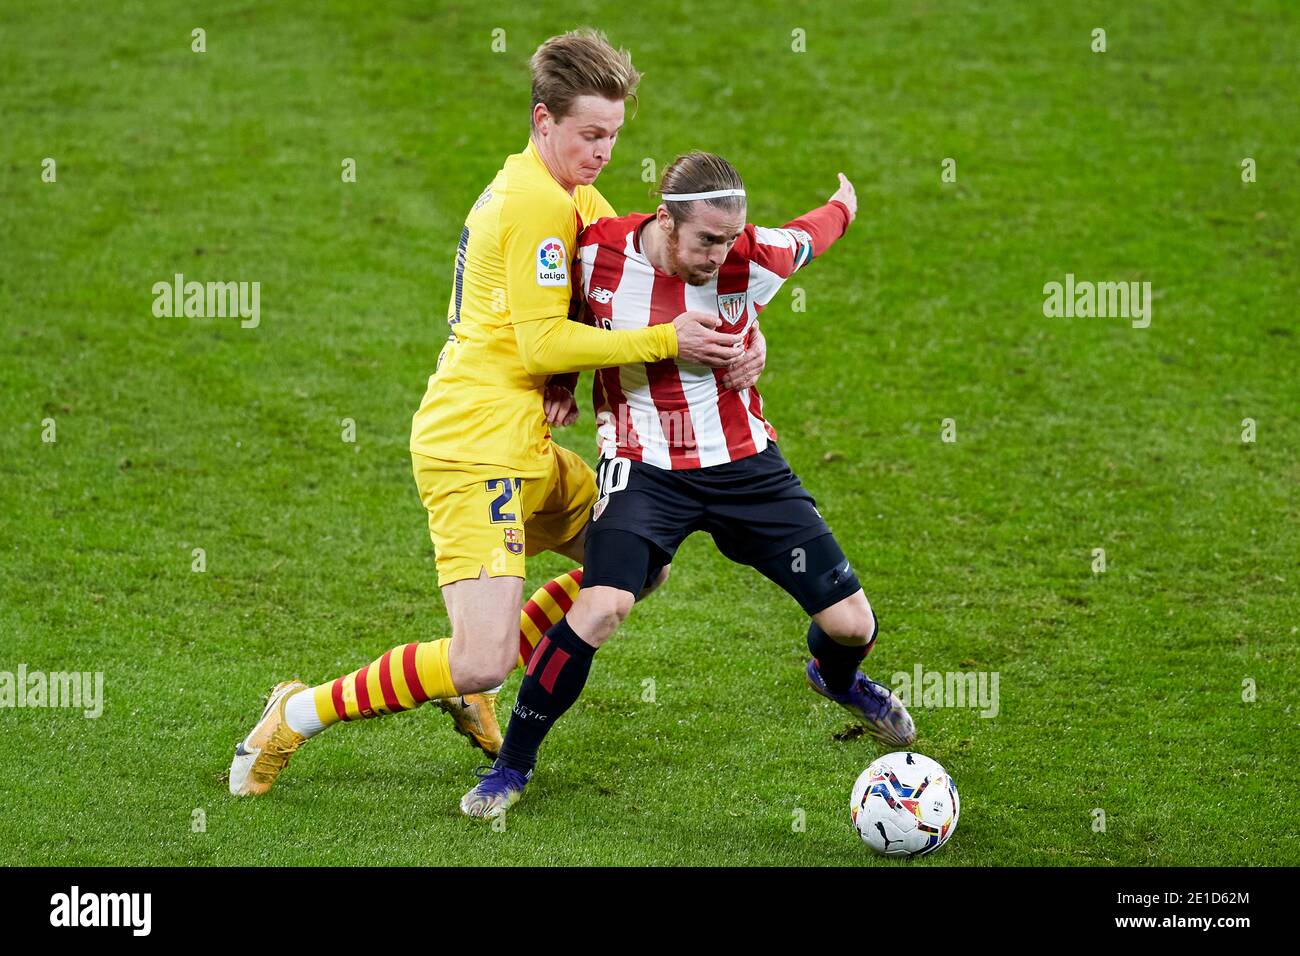 Bilbao, Spain. 06 January, 2021. Iker Muniain of Athletic Club duels for the ball with Frenkie de Jong of FC Barcelona during the La Liga match between Athletic Club Bilbao and FC Barcelona played at San Mames Stadium. Credit: Ion Alcoba/Capturasport/Alamy Live News Stock Photo